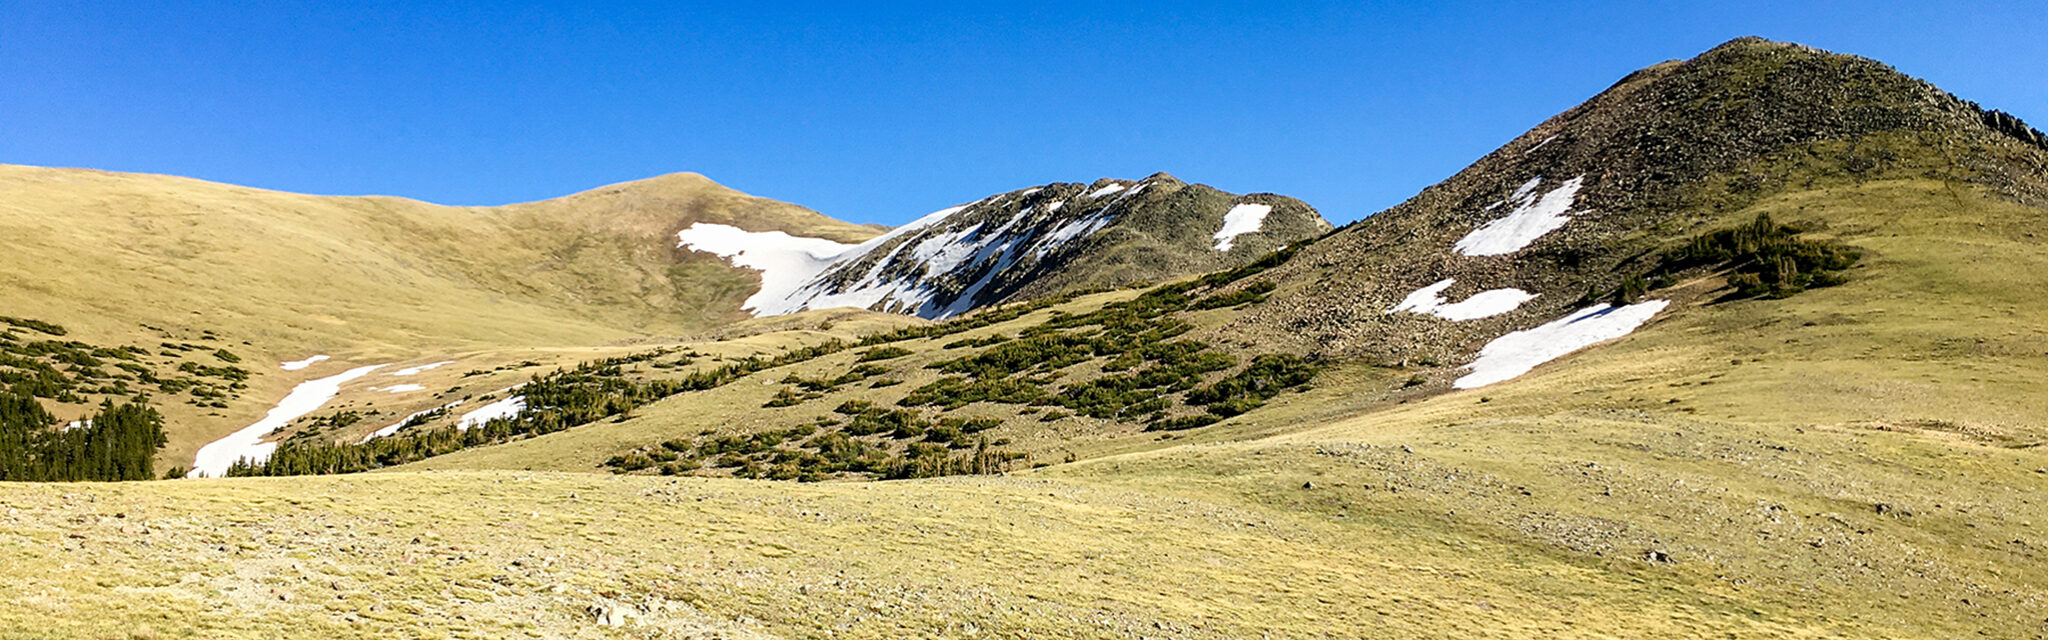 A wide open alpine meadow above treeline with snow patches in the distant hills.